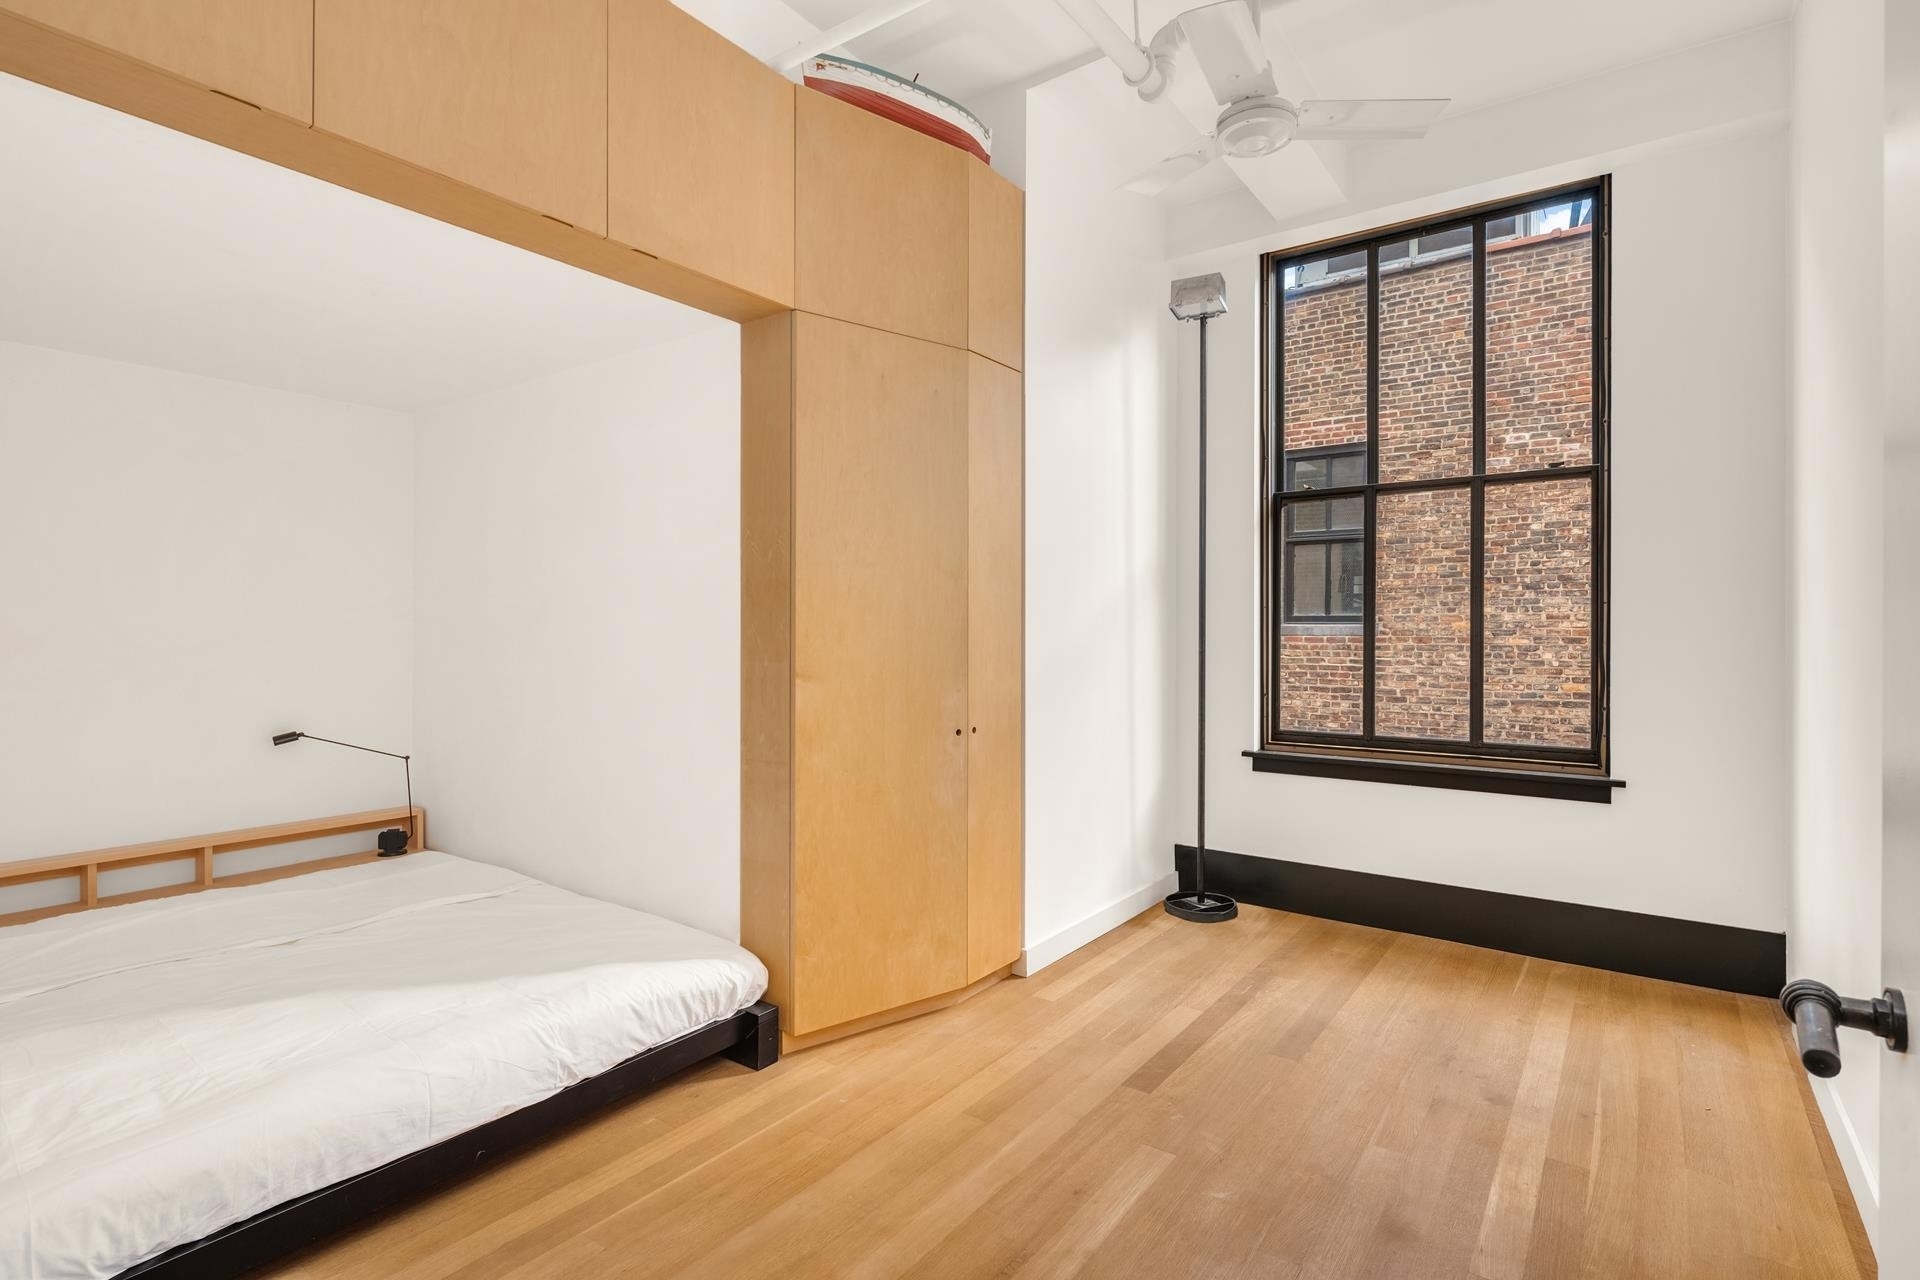 15. Co-op Properties for Sale at 12 Lofts, 38 W 26TH ST, PH12 Flatiron District, New York, NY 10010